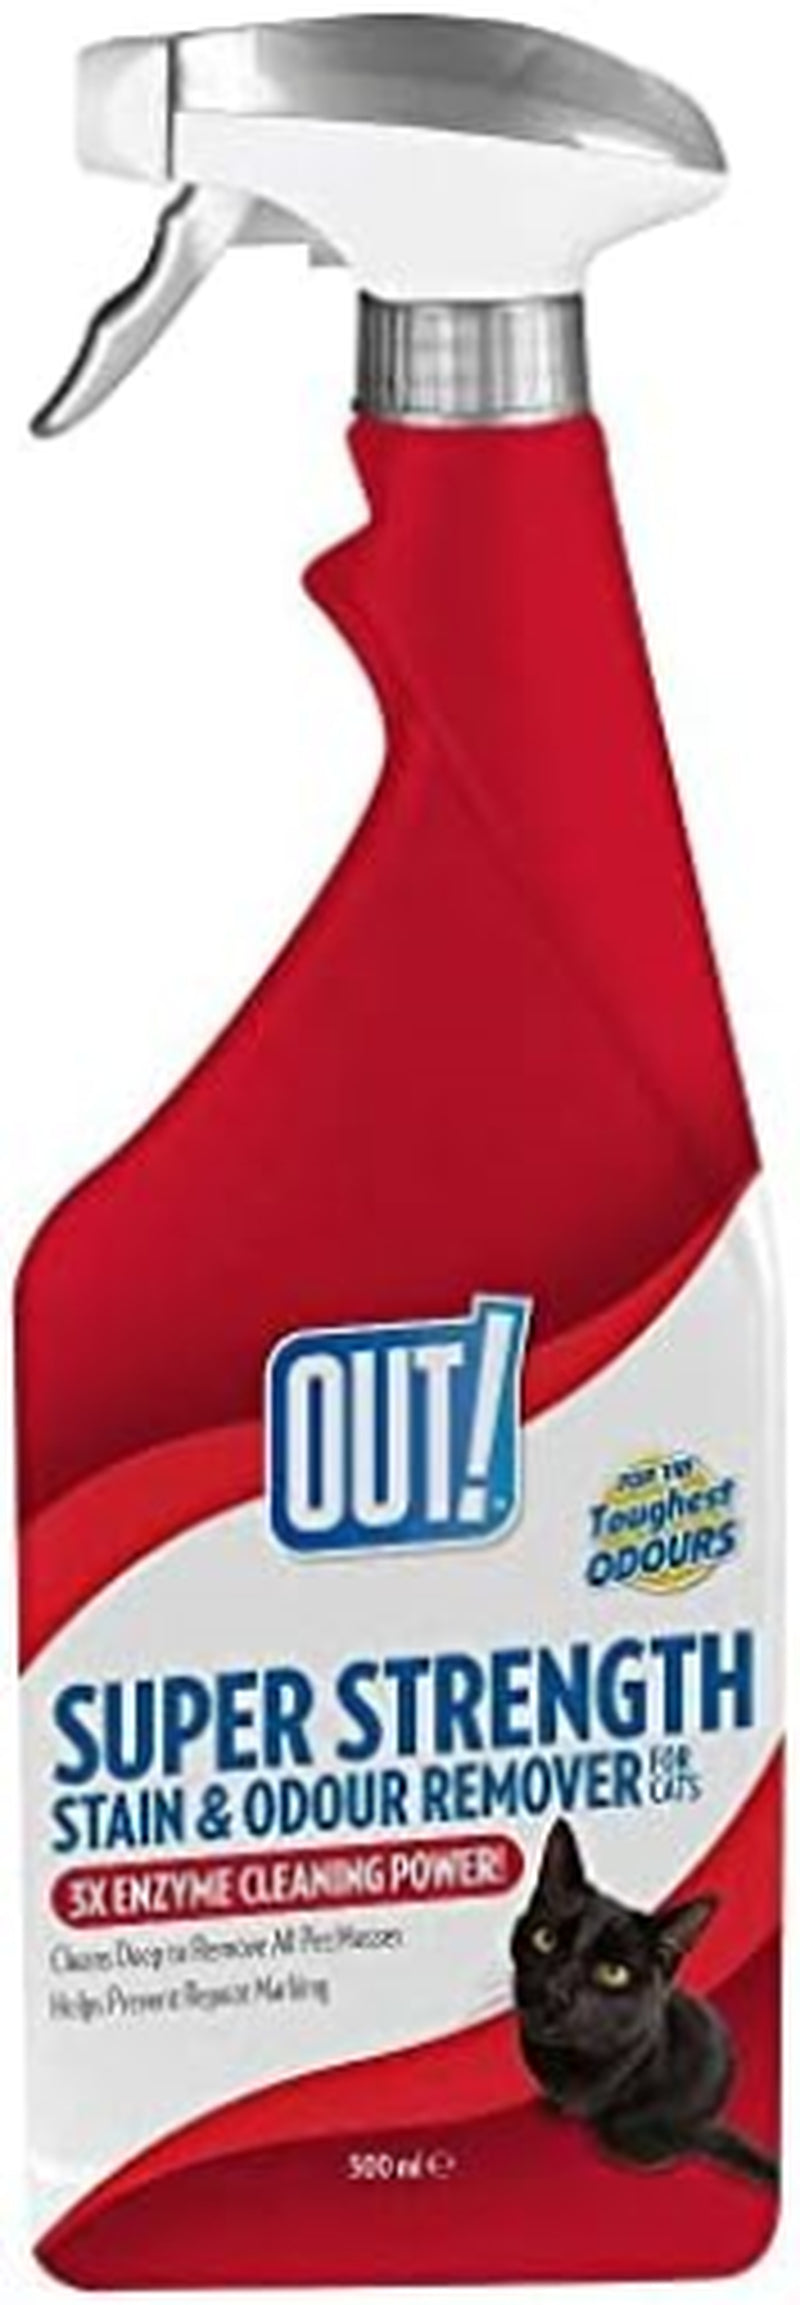 OUT! Super Strength Pet Stain and Odour Remover| 3X Enzymatic Pro-Bacteria 500